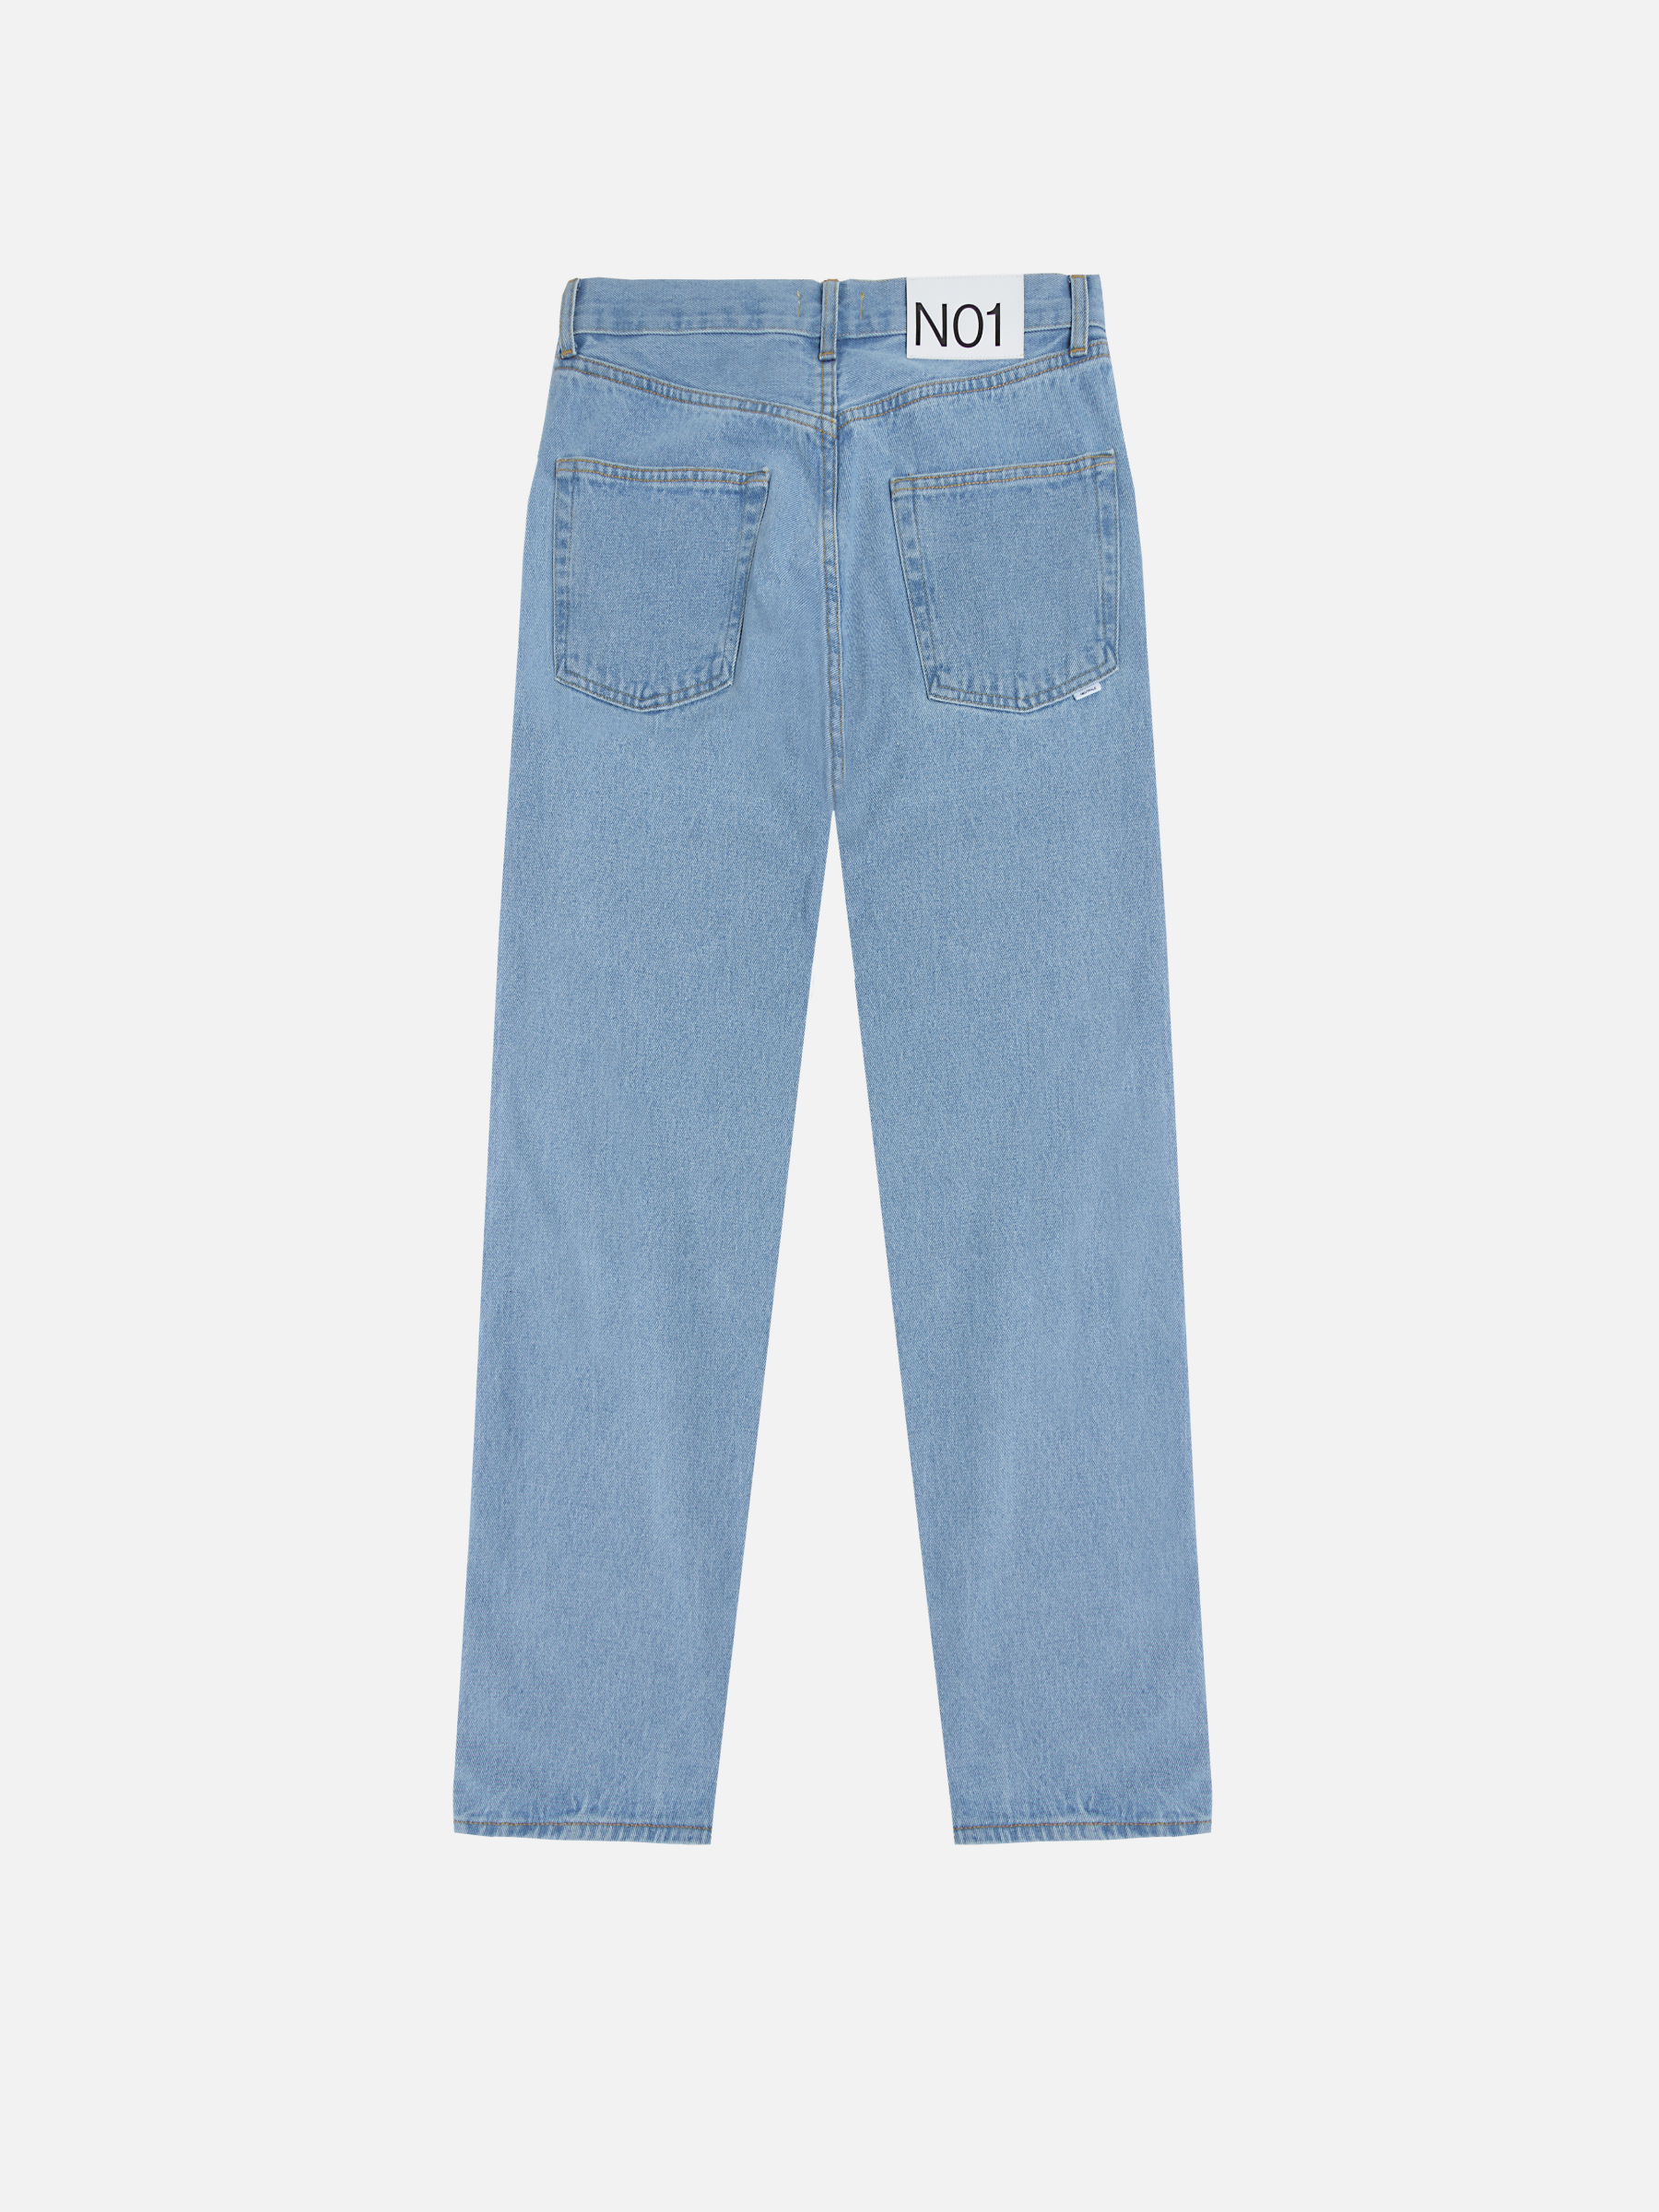 WASHED BLUE JEANS N01